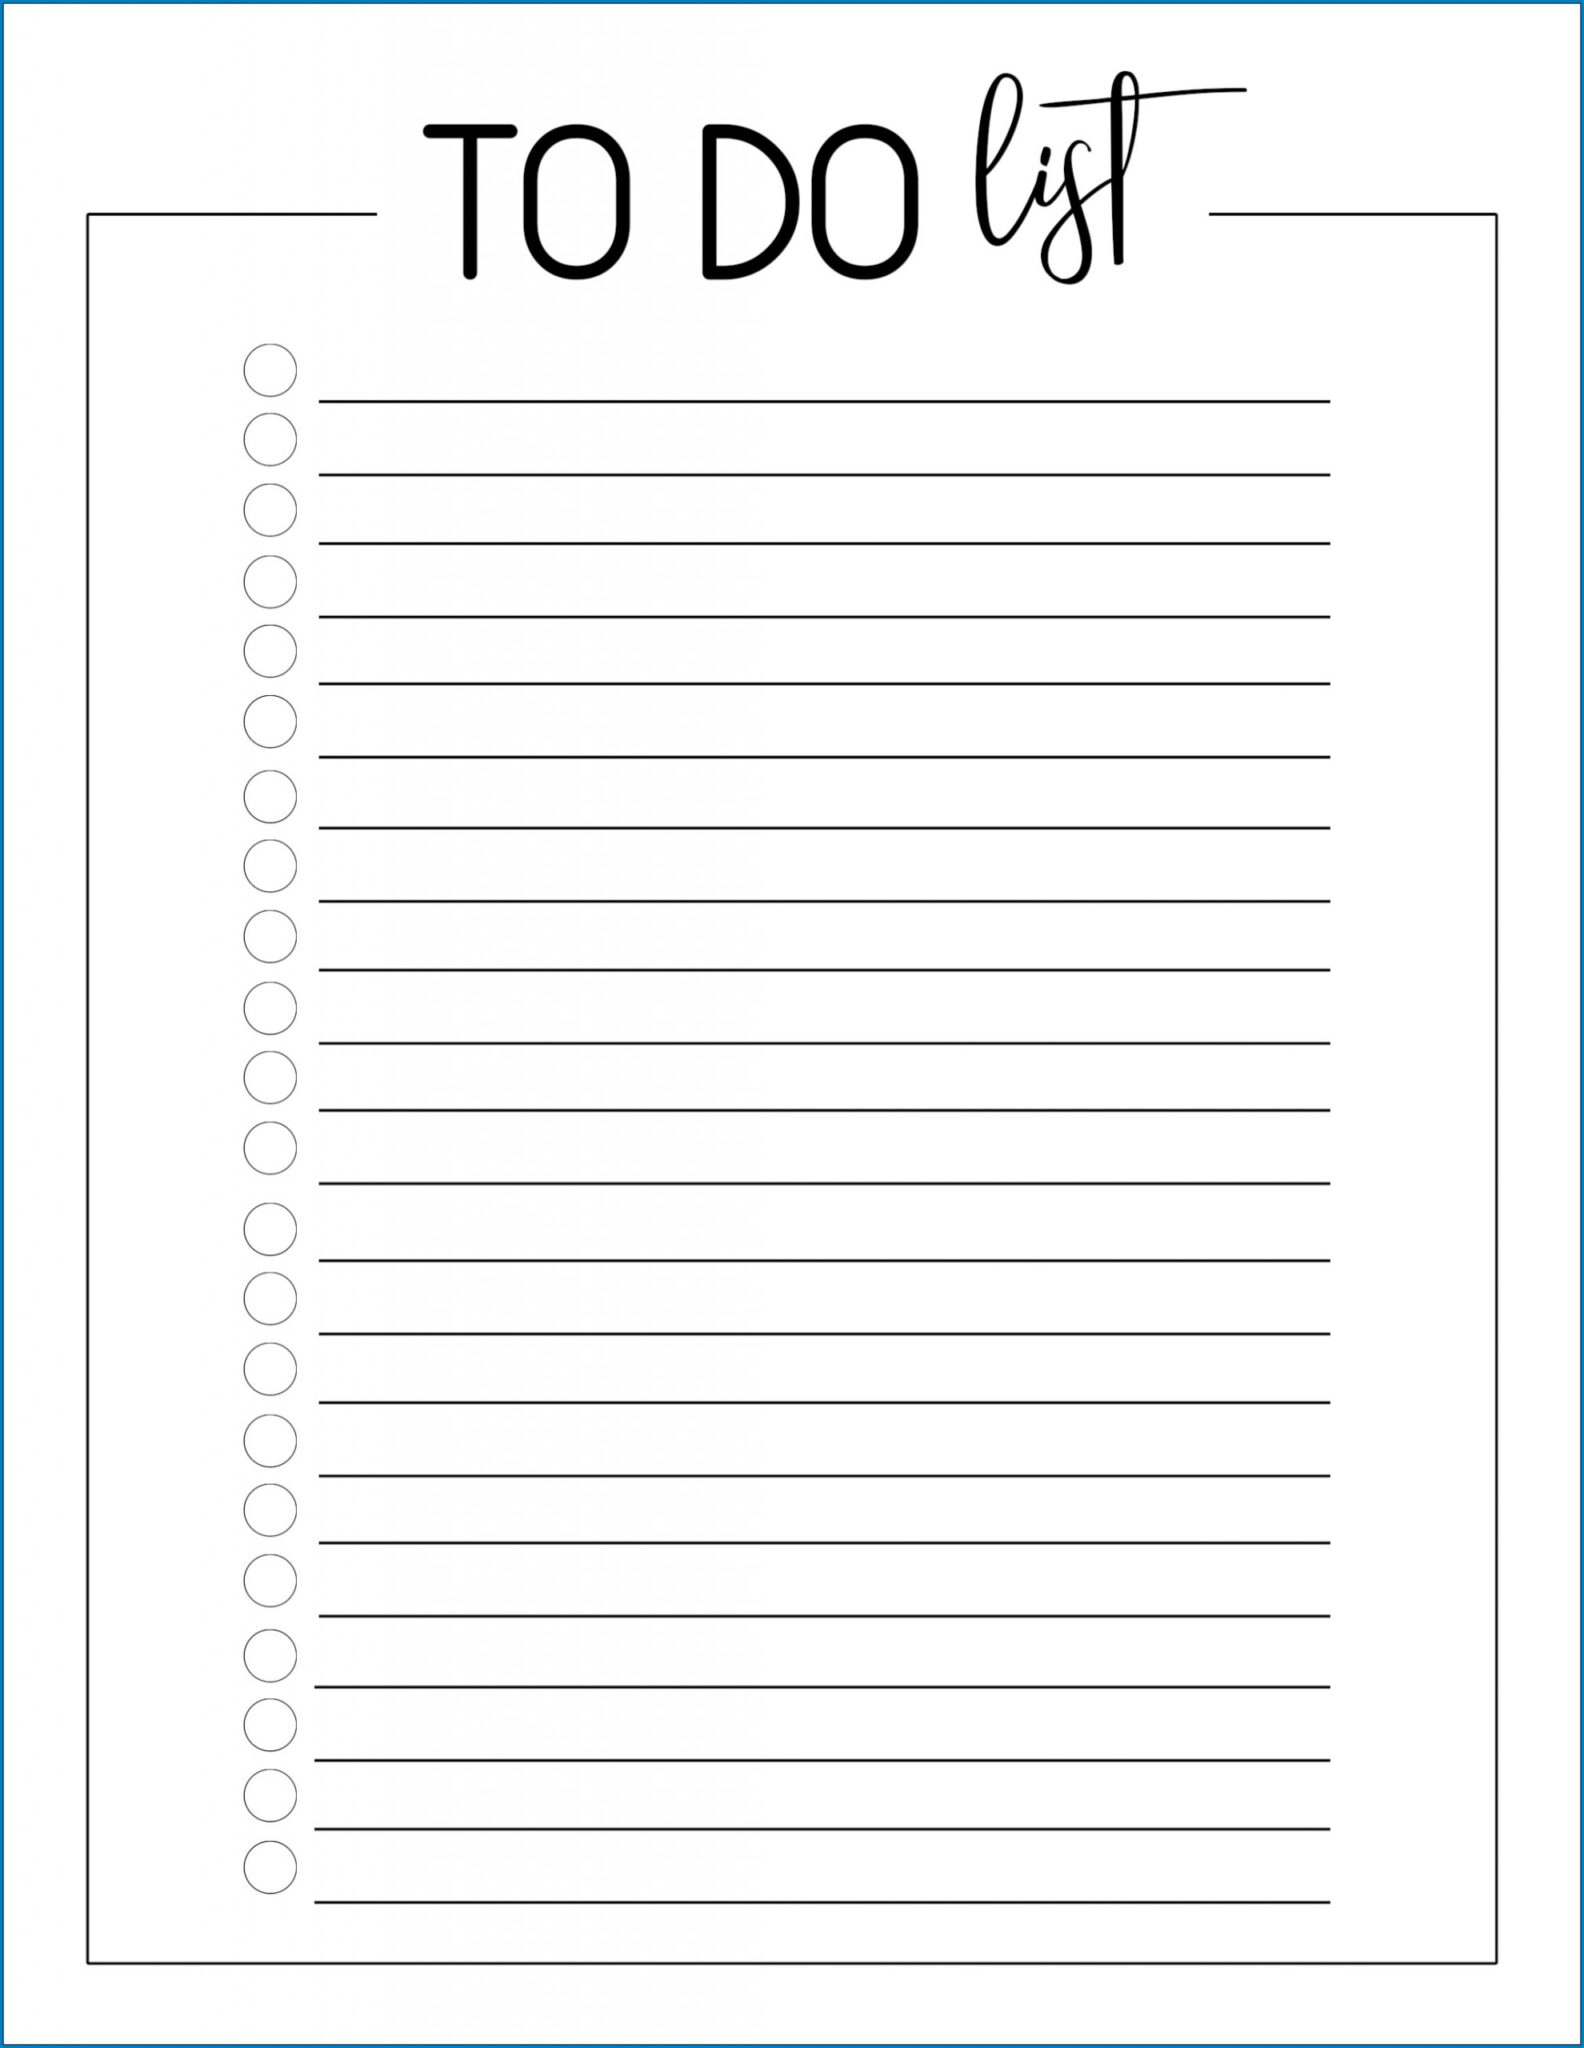 √ Free To Do List Printable Template | Templateral In Blank To Do List